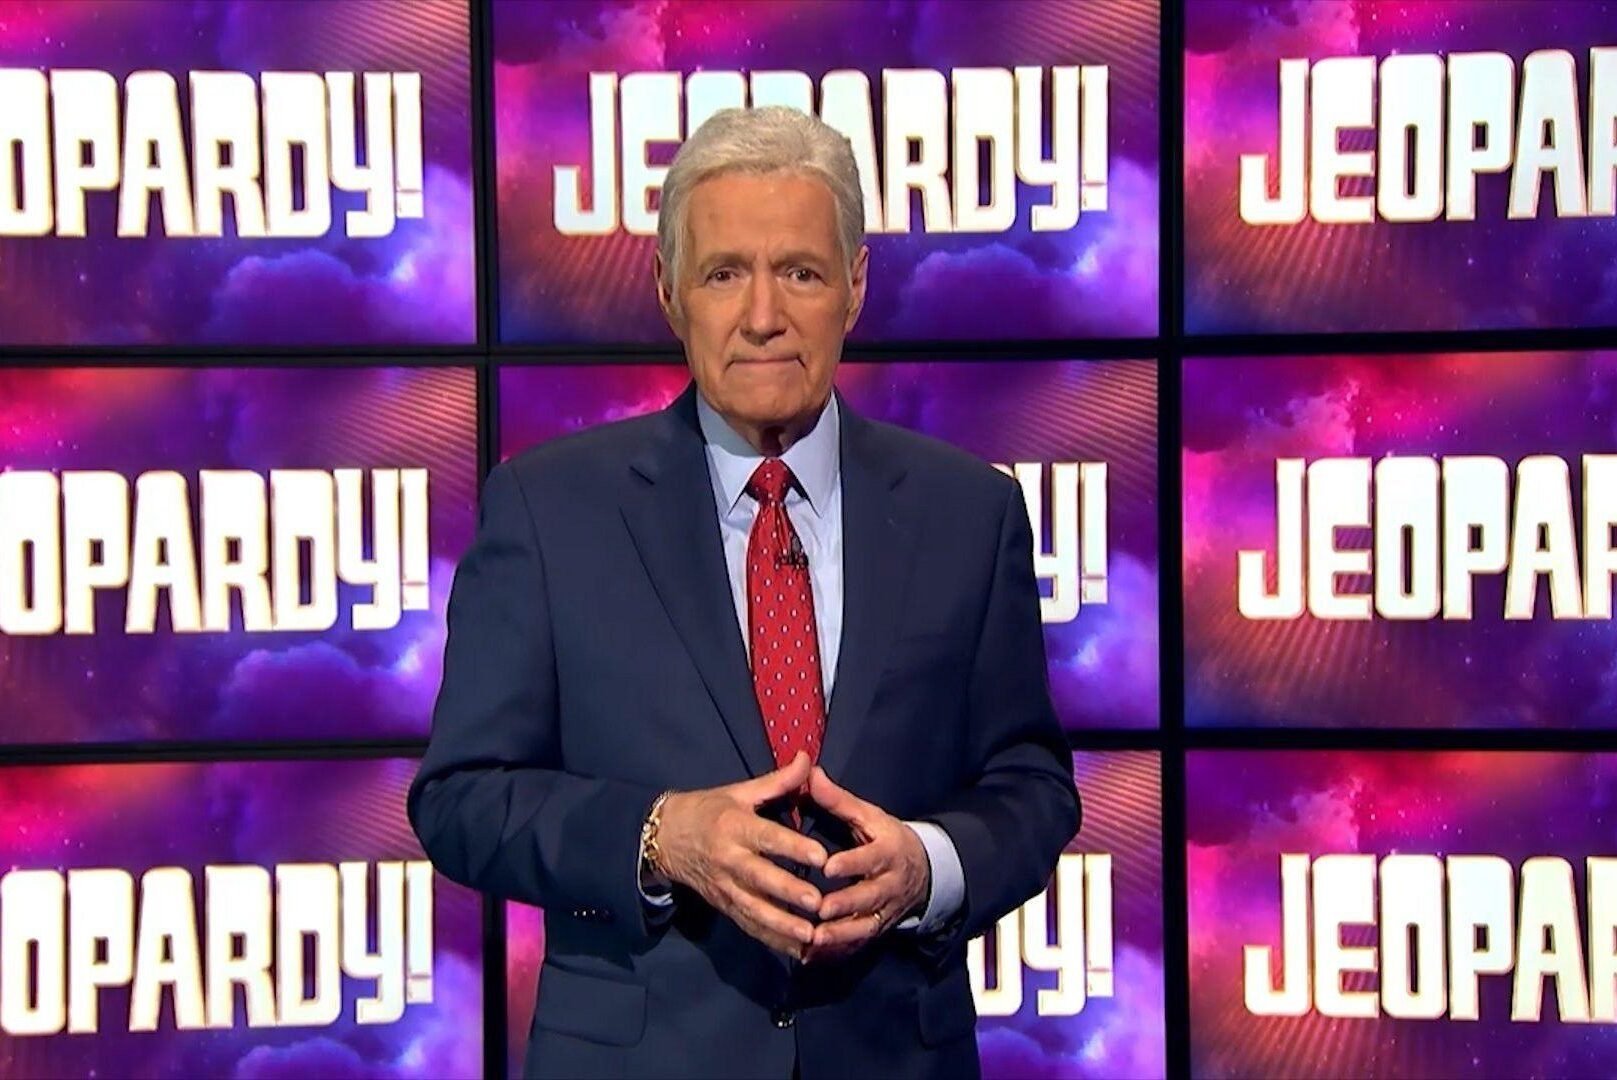 Jeopardy Meltdown: Complete Timeline Of How The Show Destroyed Itself